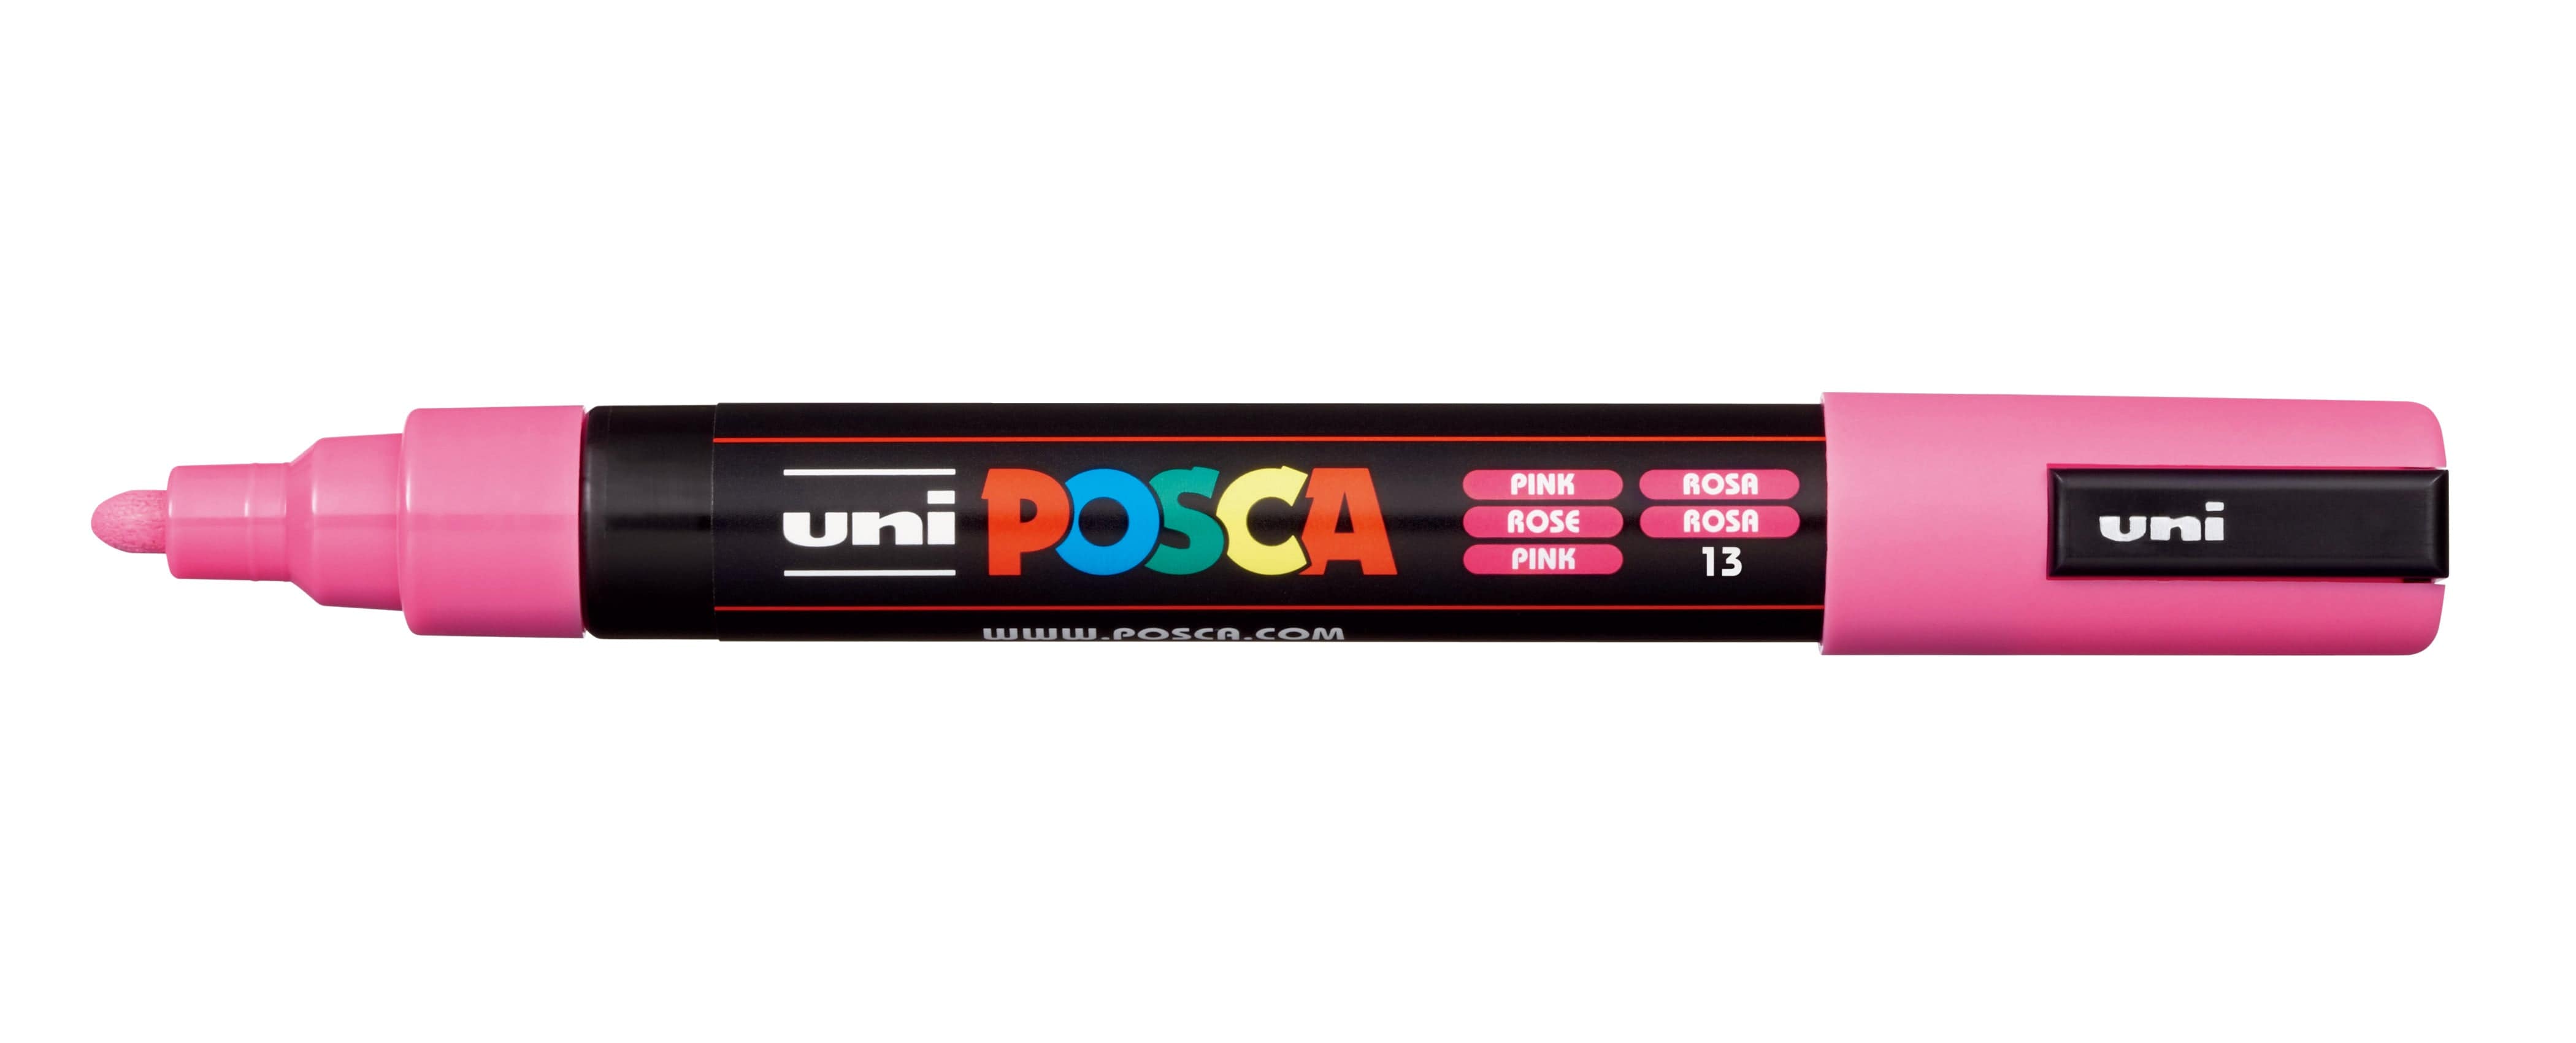 Posca Markers 5M Pink